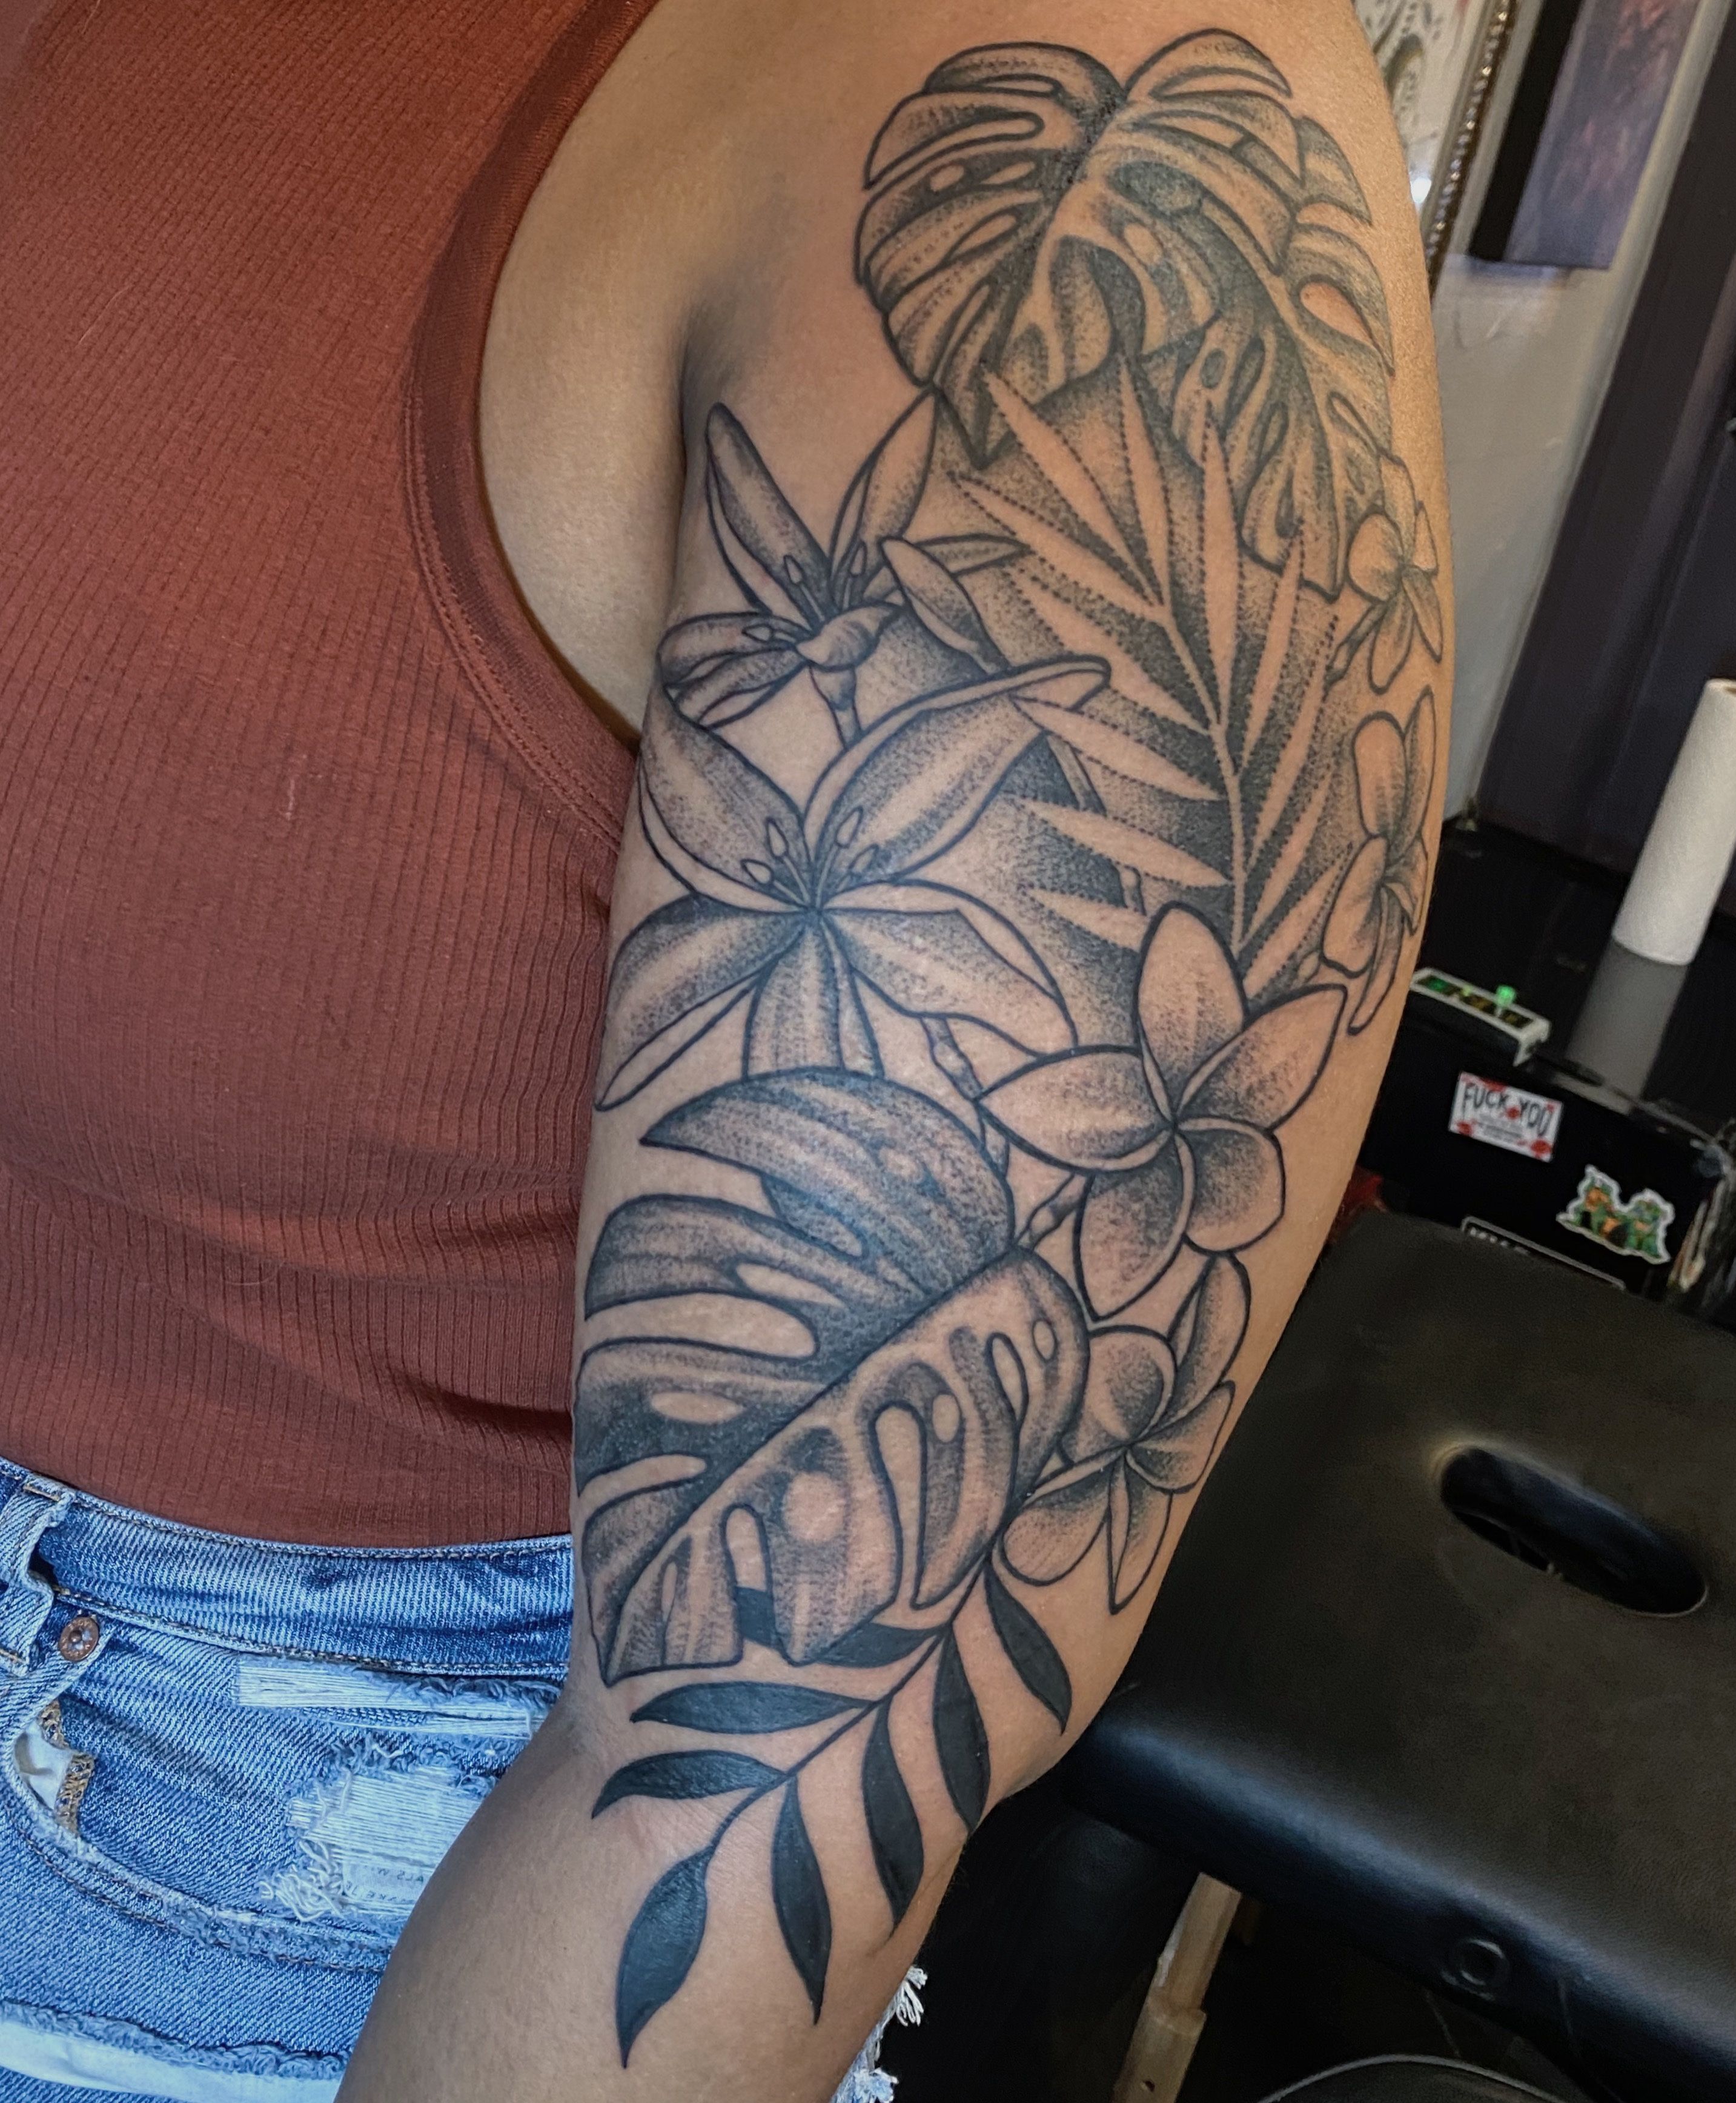 jungle sleeve tattoo  instead of frogtiger or black panther  Sleeve  tattoos for women Nature tattoo sleeve Inspirational tattoos